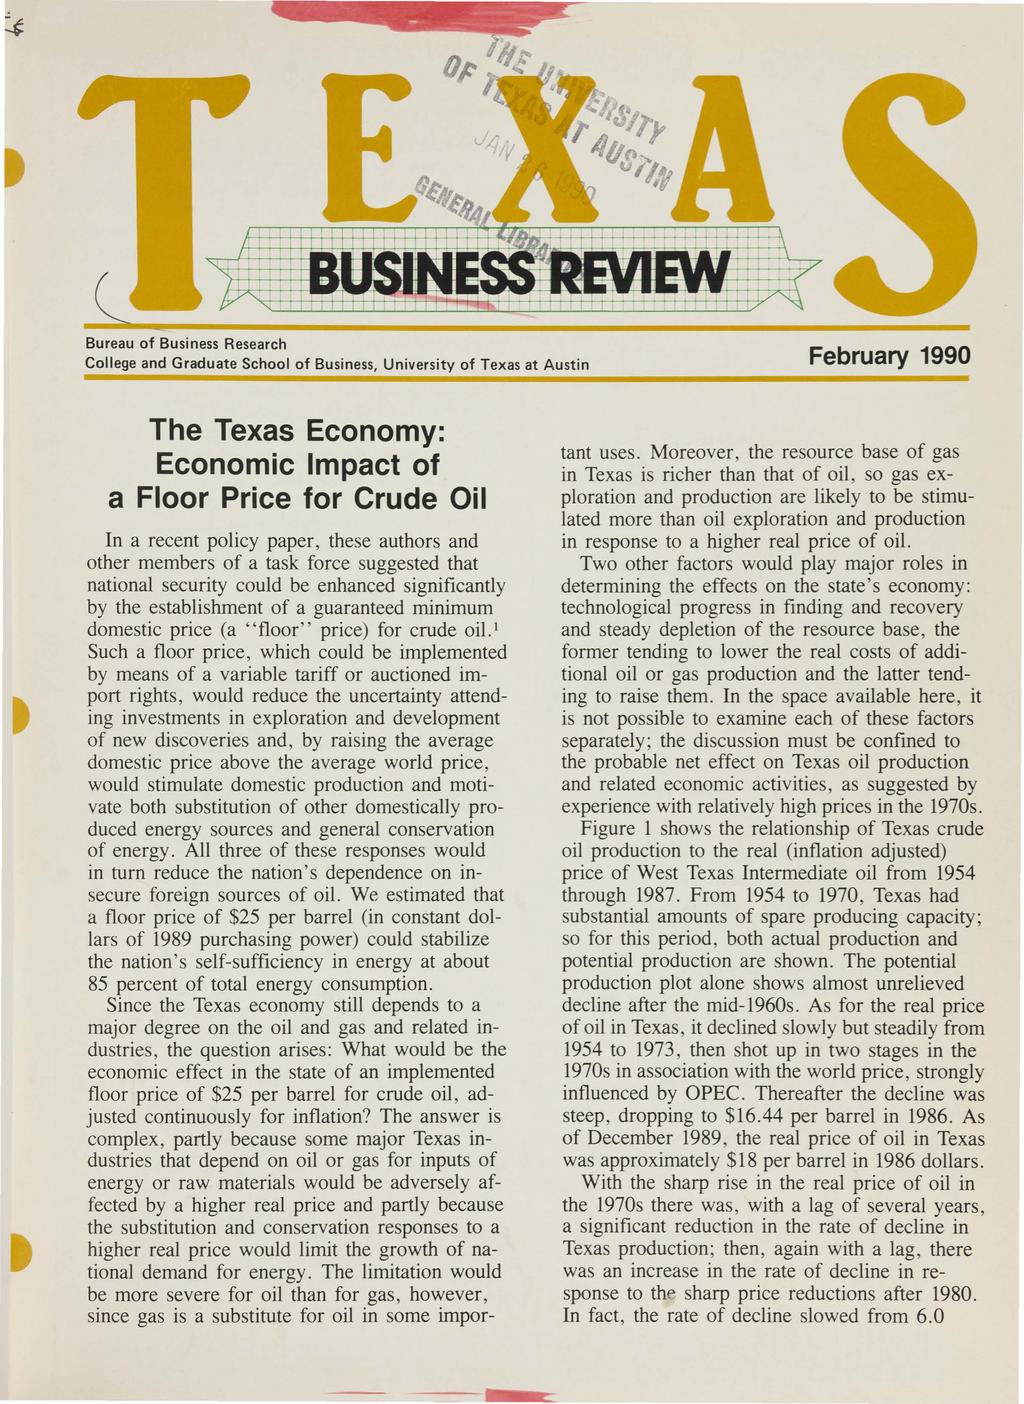 Bureau of Business Research College and Graduate School of Business, University of Texas at Austin February 1990 The Texas Economy: Economic Impact of a Floor Price for Crude Oil In a recent policy